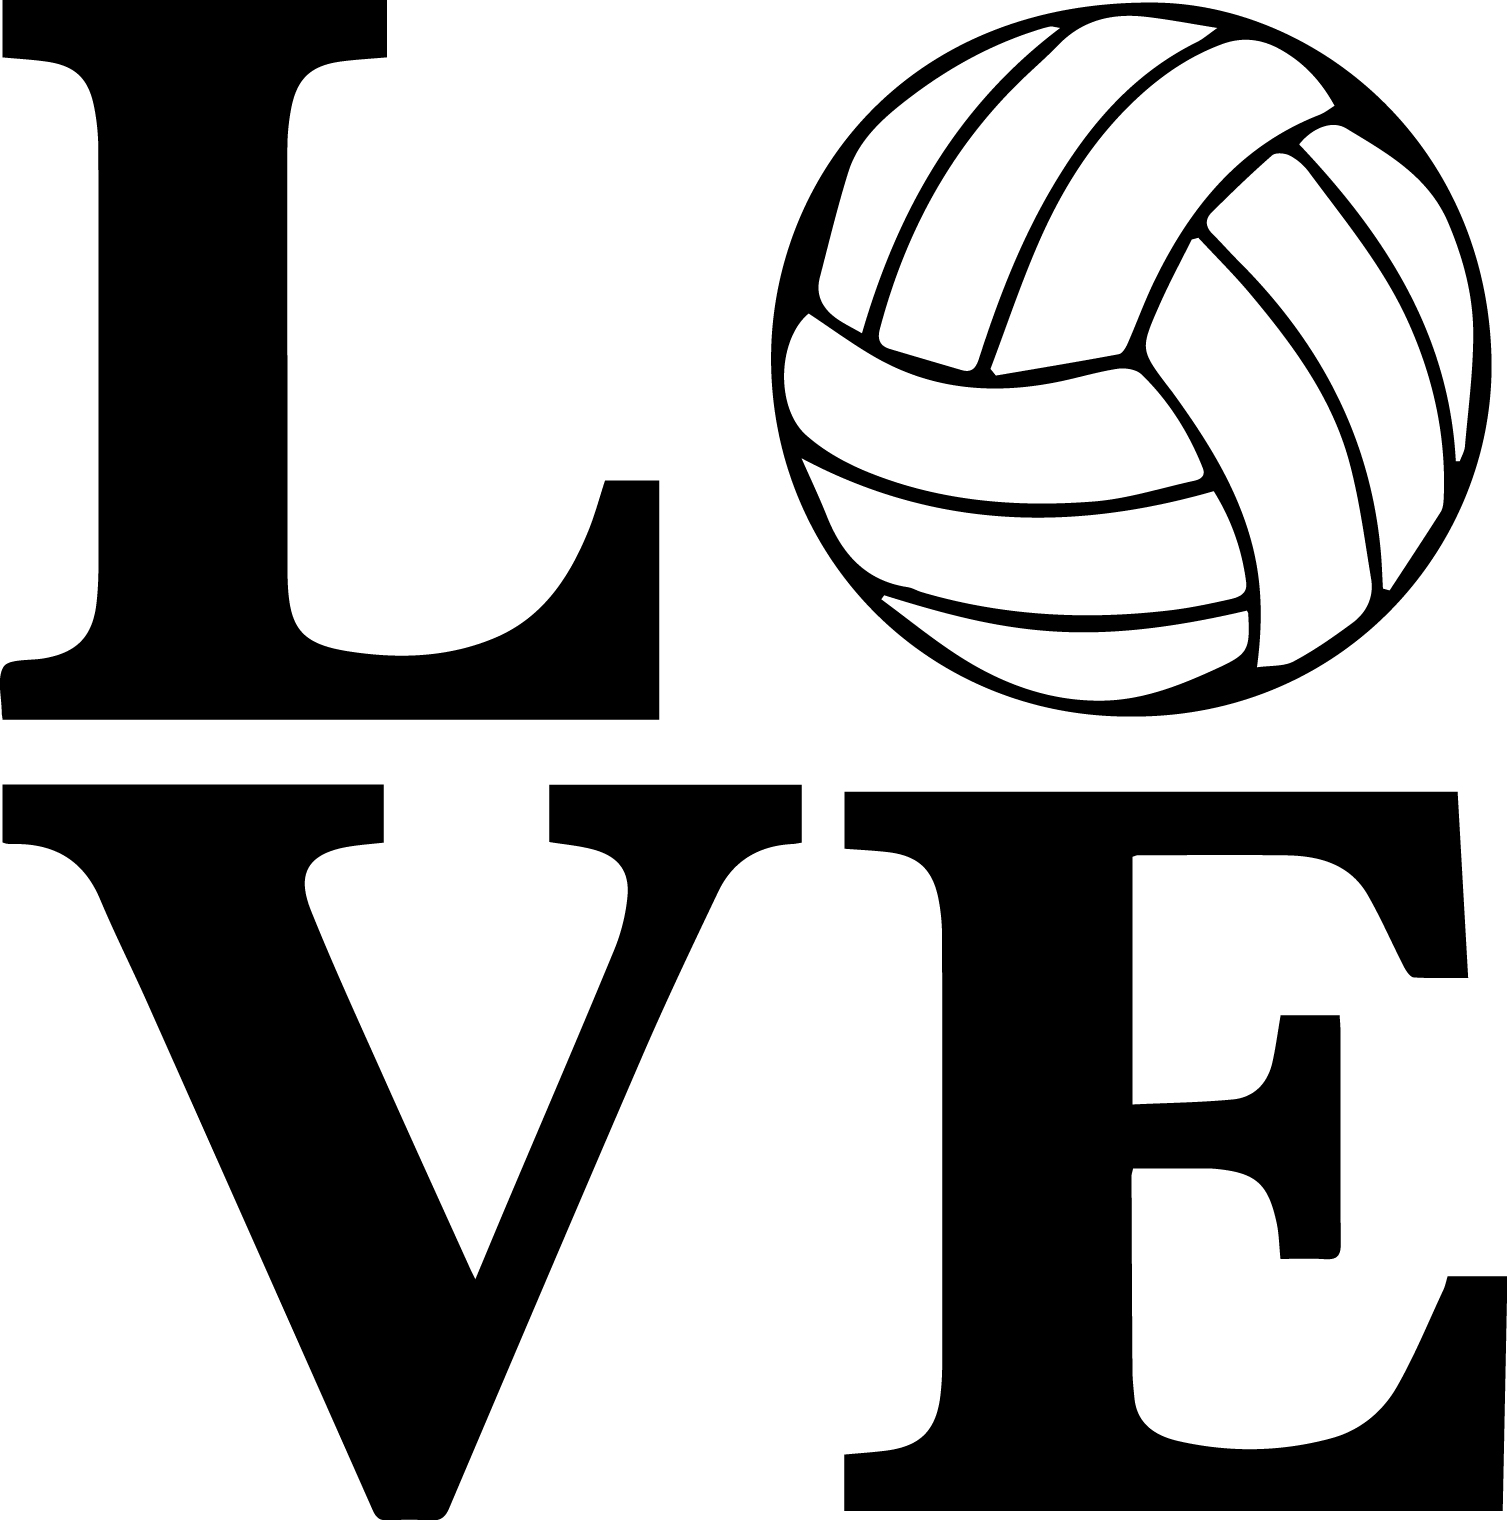 Free Love Volleyball Cliparts, Download Free Clip Art, Free